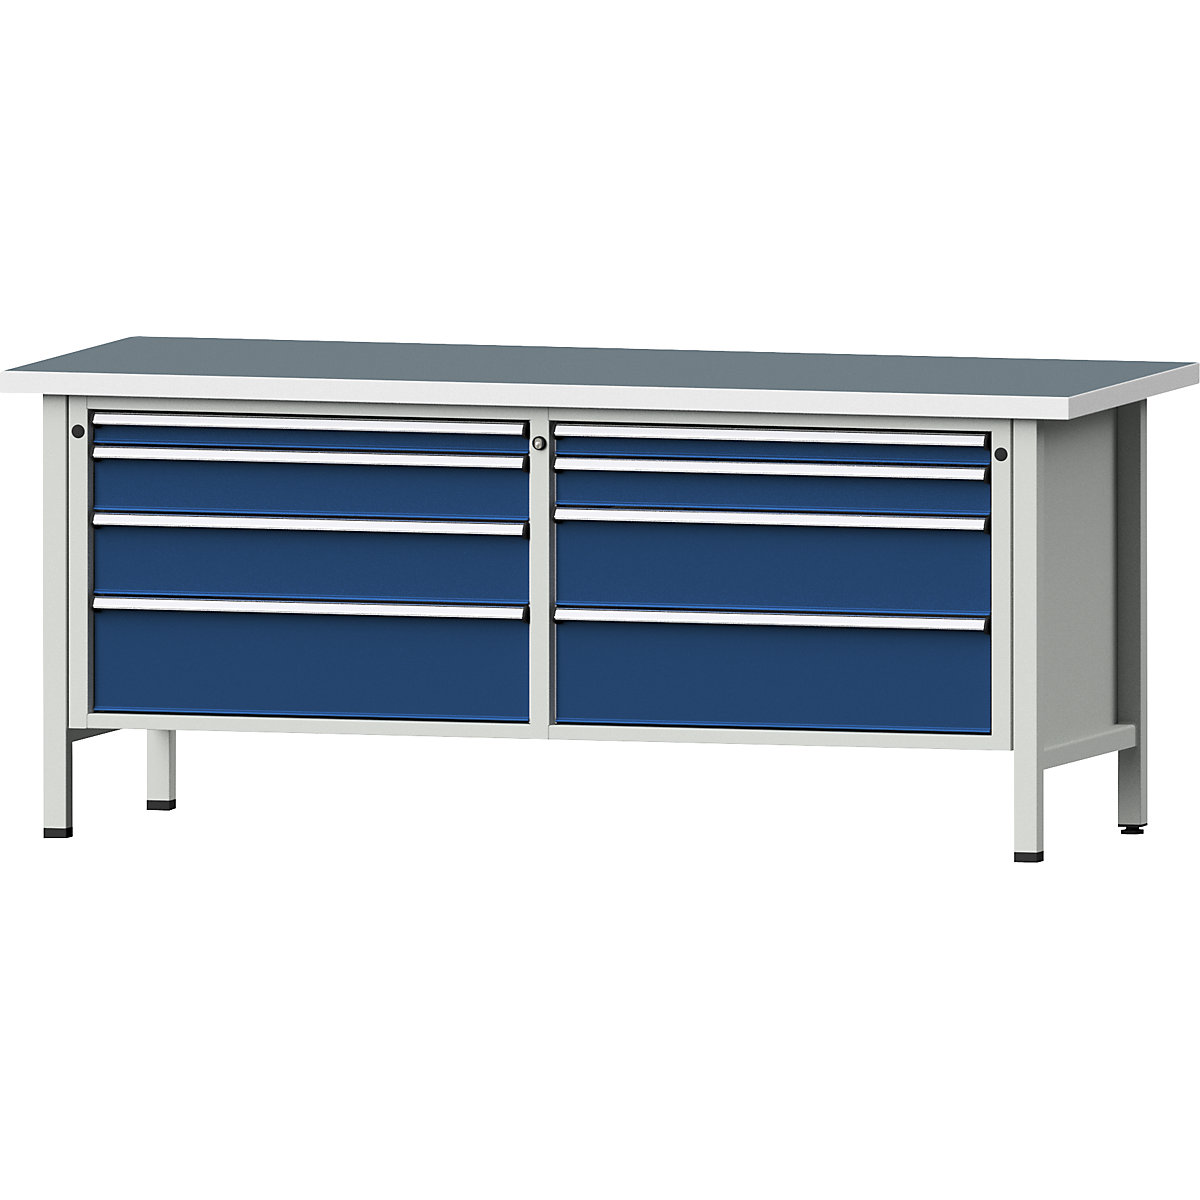 Workbench with XL/XXL drawers, frame construction – ANKE, width 2000 mm, 8 drawers, universal worktop, front in gentian blue-9